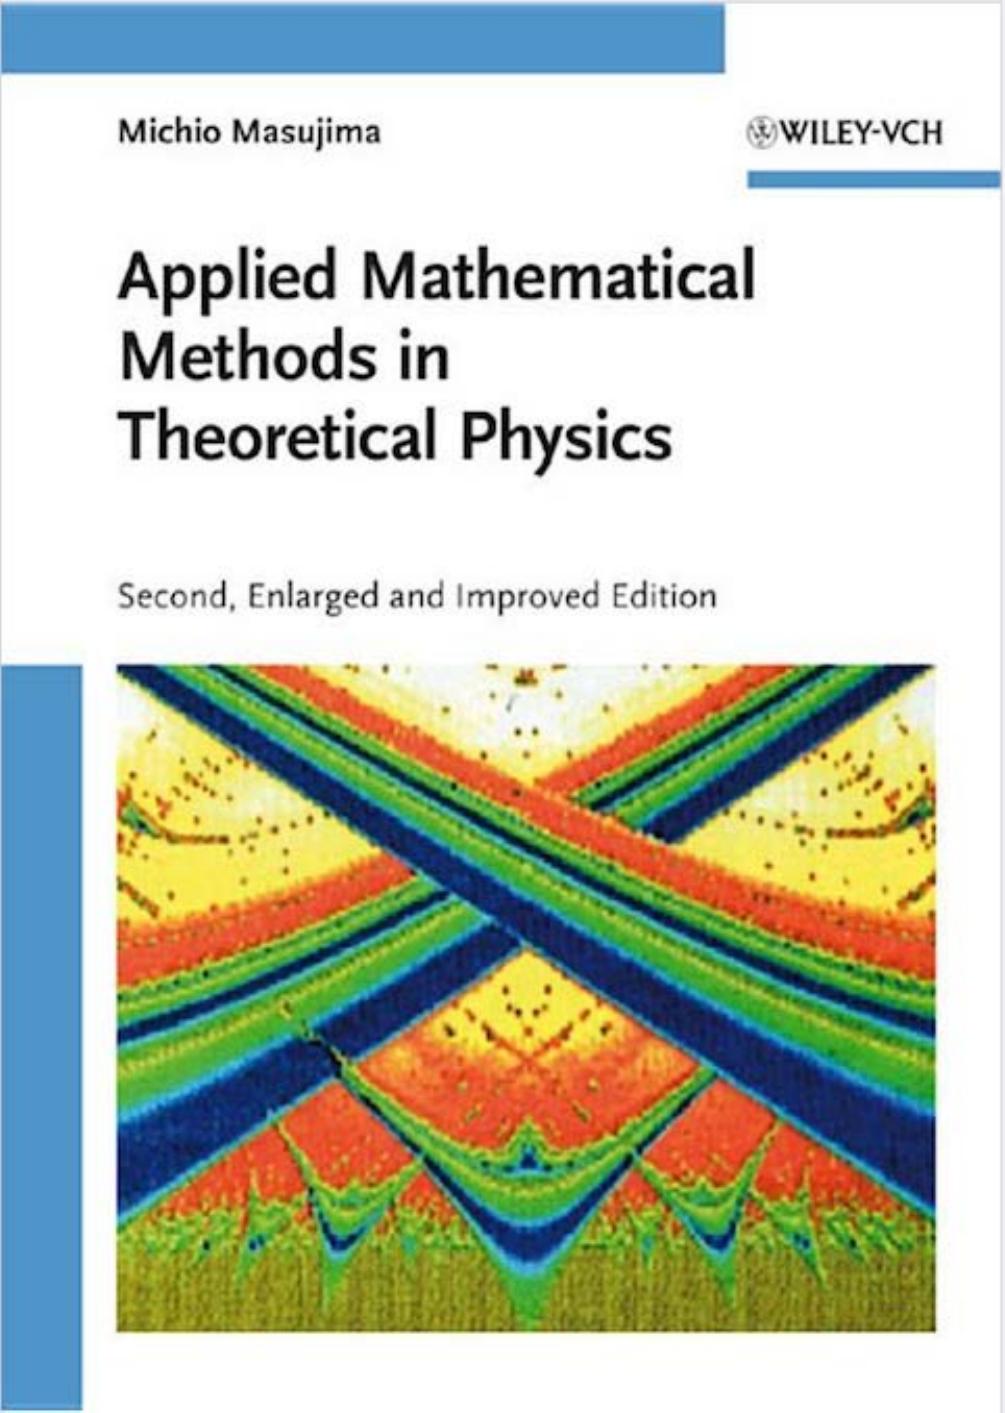 Applied Mathematical Methods in Theoretical Physics: Second, Enlarged and Improved Edition